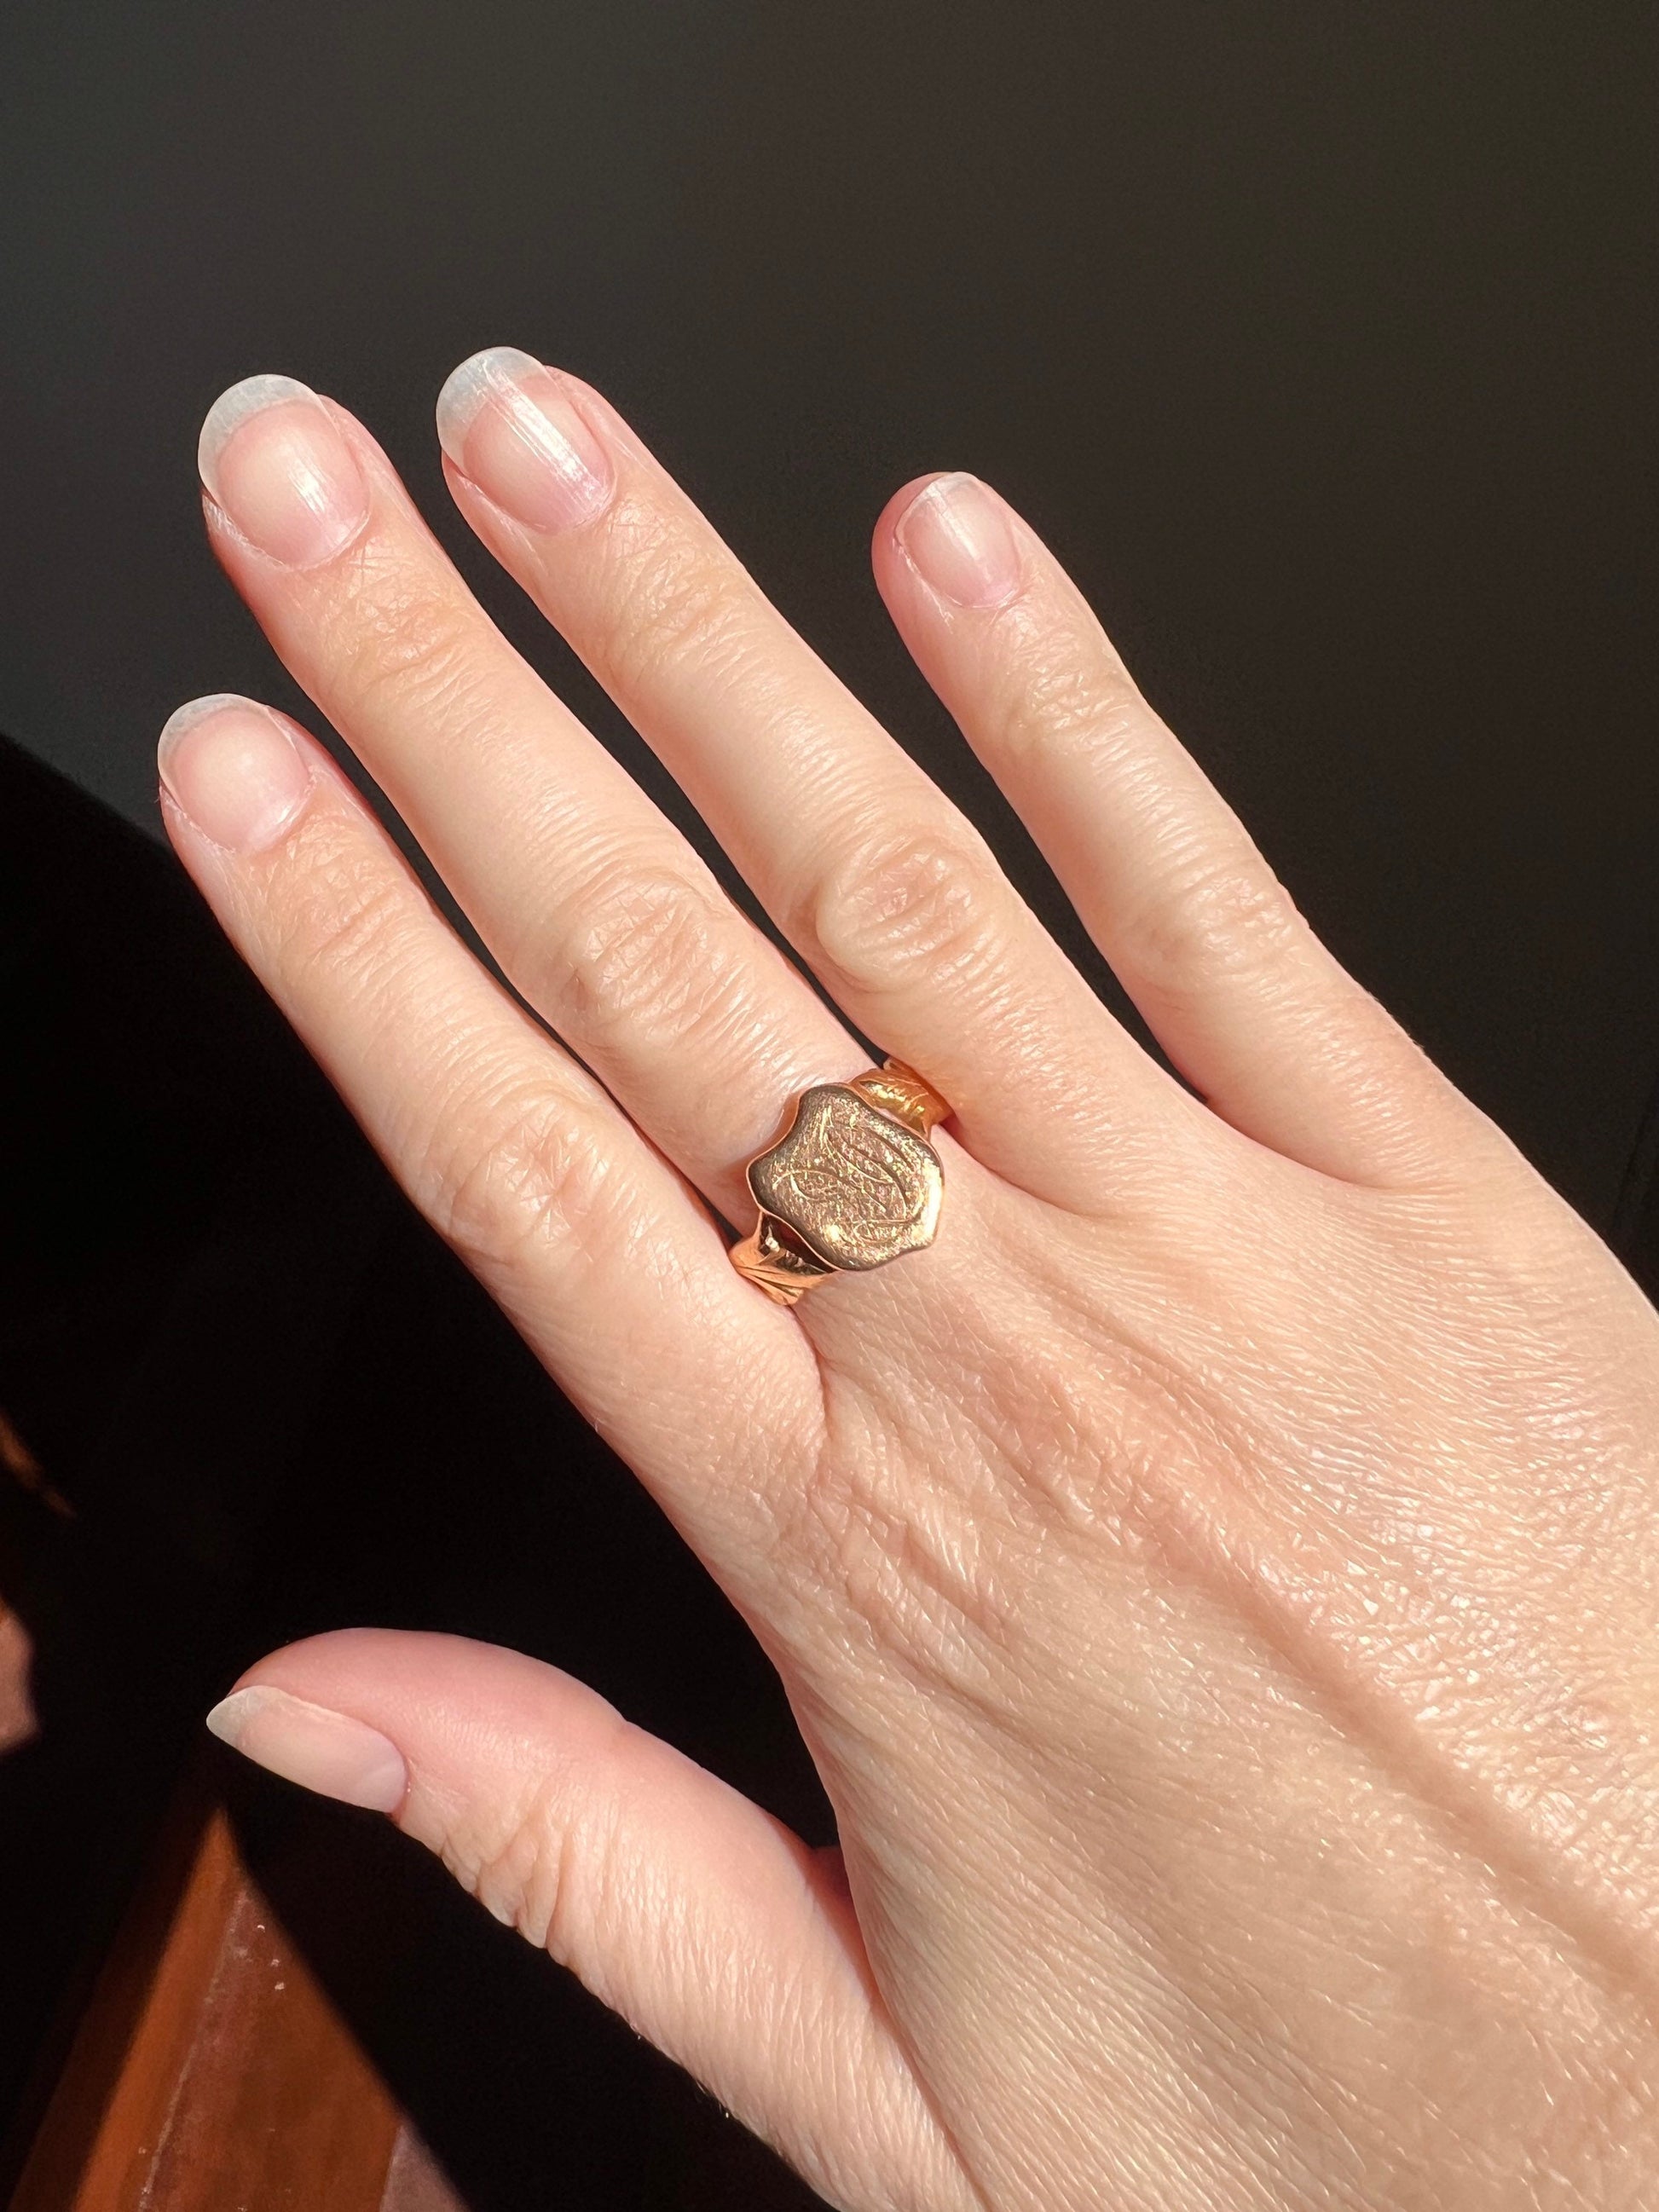 SHIELD Signet Ring Antique FRENCH Chunky 4.95g 14k Gold Rosy Open Leaf Shoulders Wide Stacker Victorian Belle Epoque Sweet Gift Initials MD